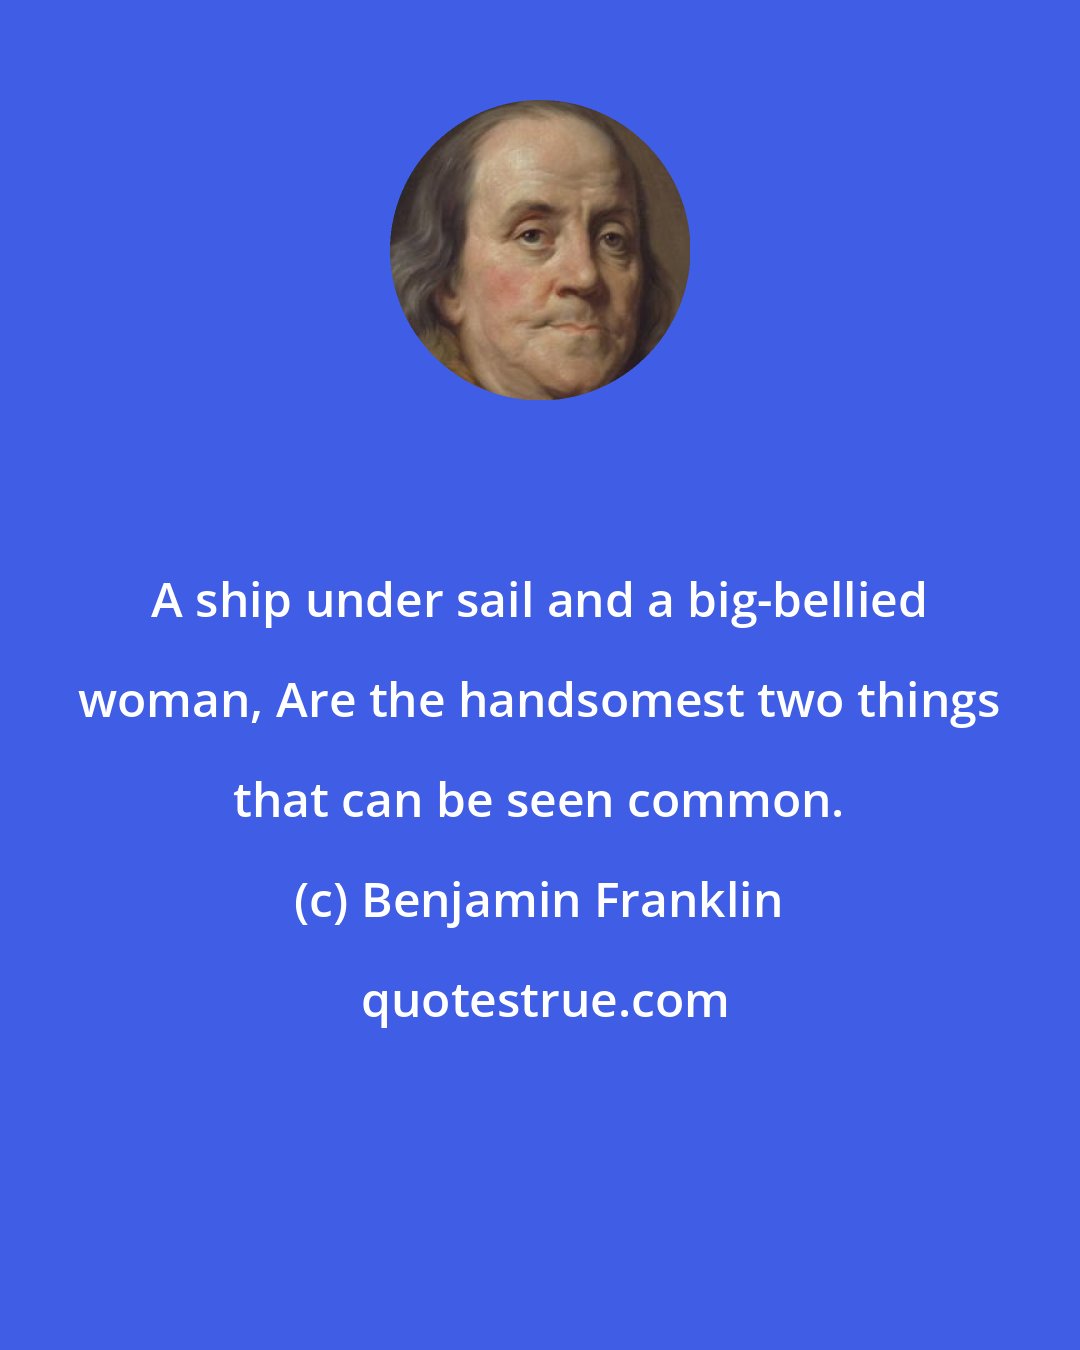 Benjamin Franklin: A ship under sail and a big-bellied woman, Are the handsomest two things that can be seen common.